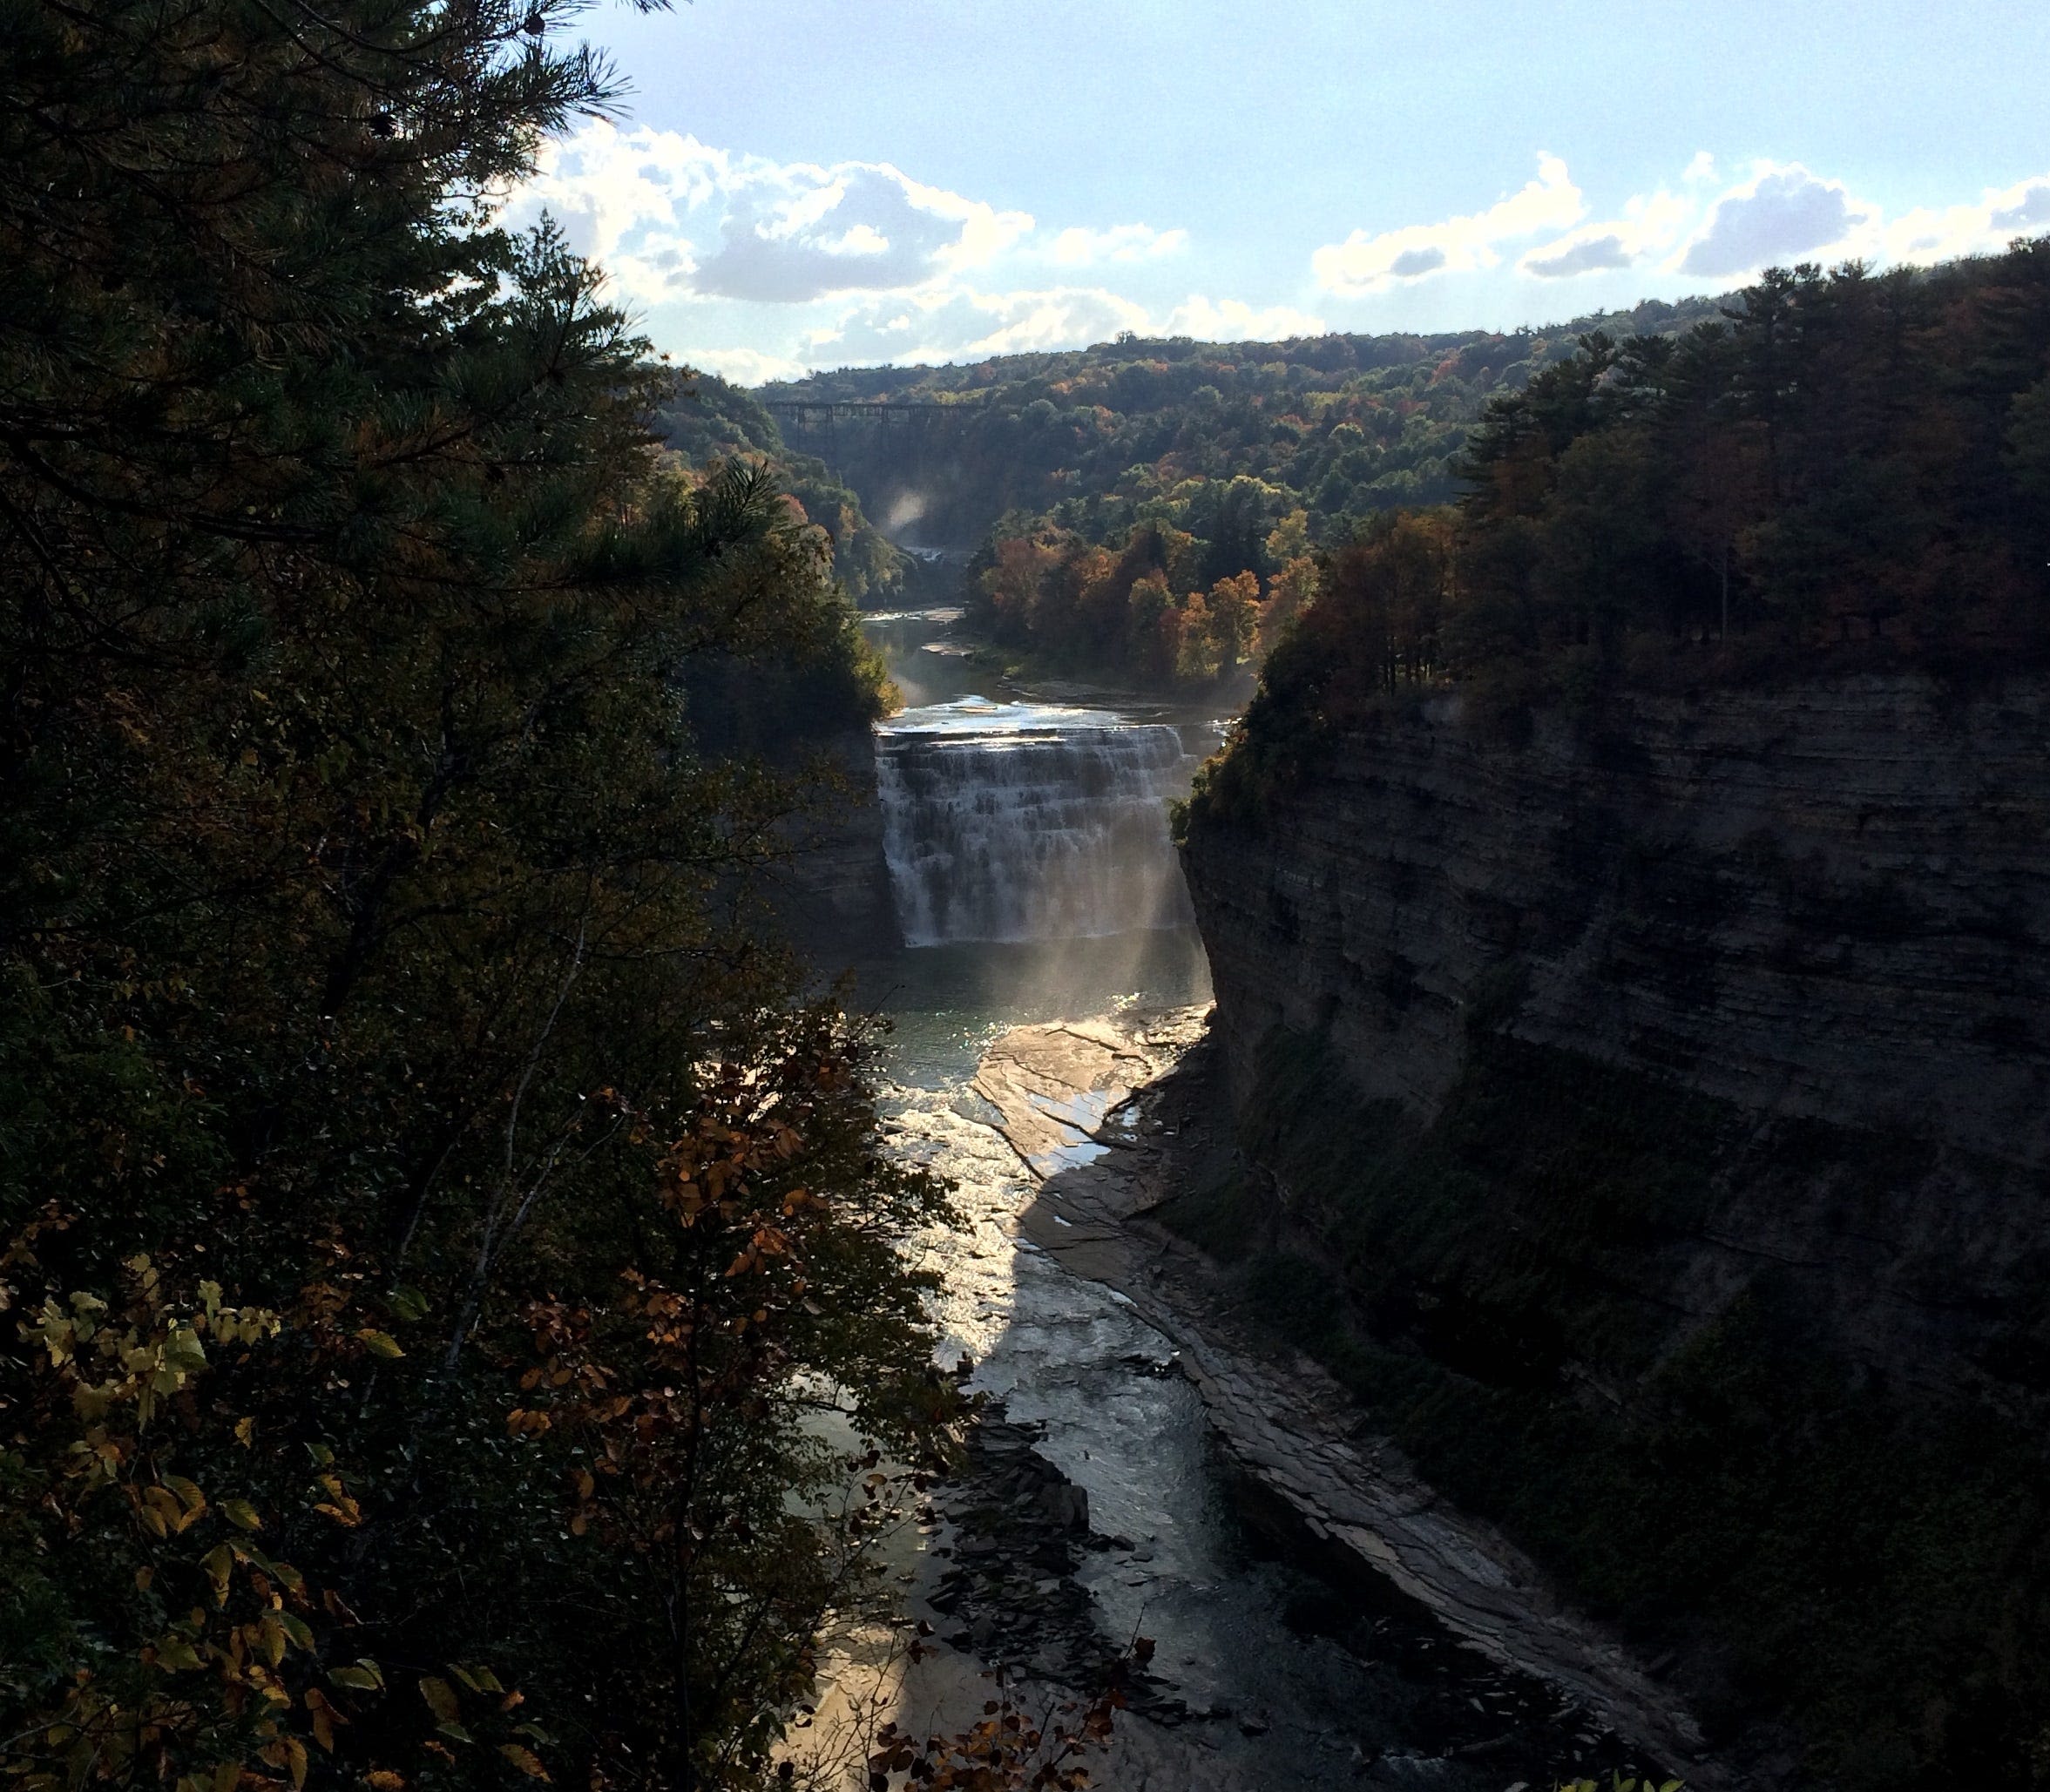 Situation in Letchworth park resolved; portion of park reopens